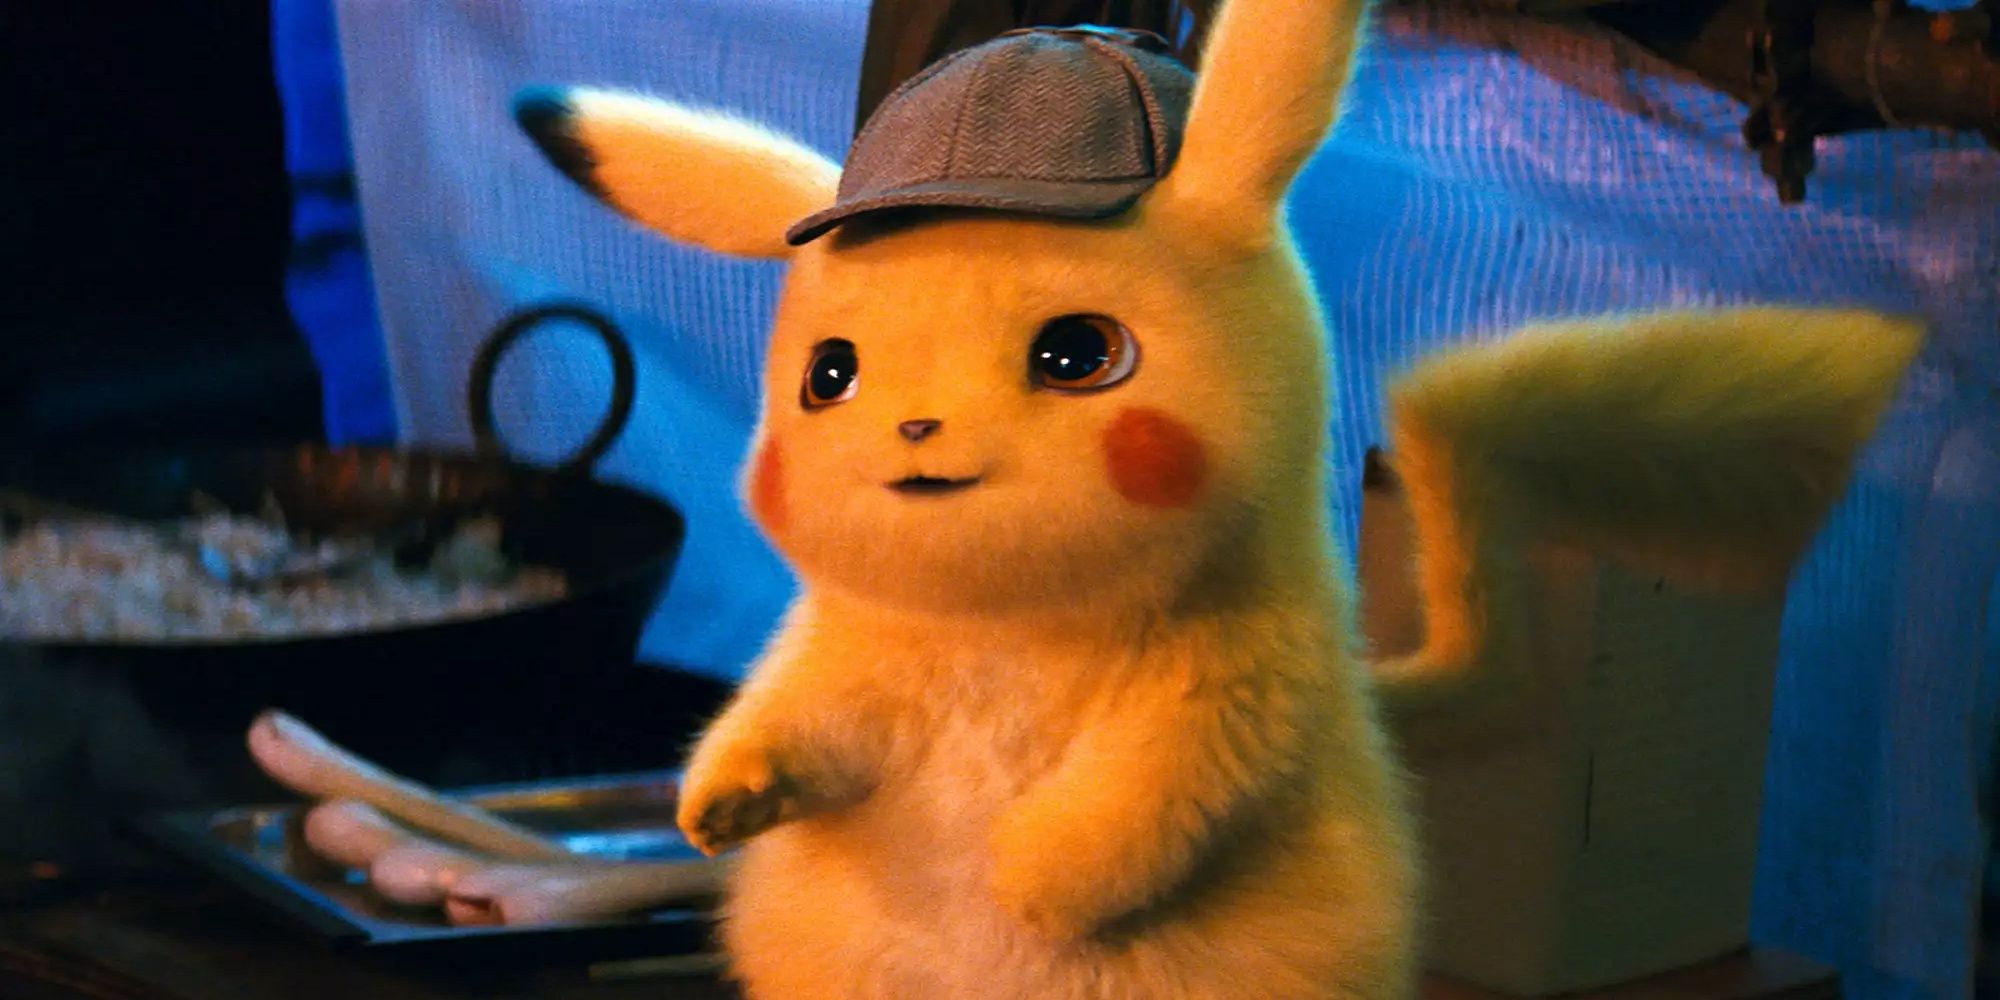 Scene from the Detective Pikachu movie